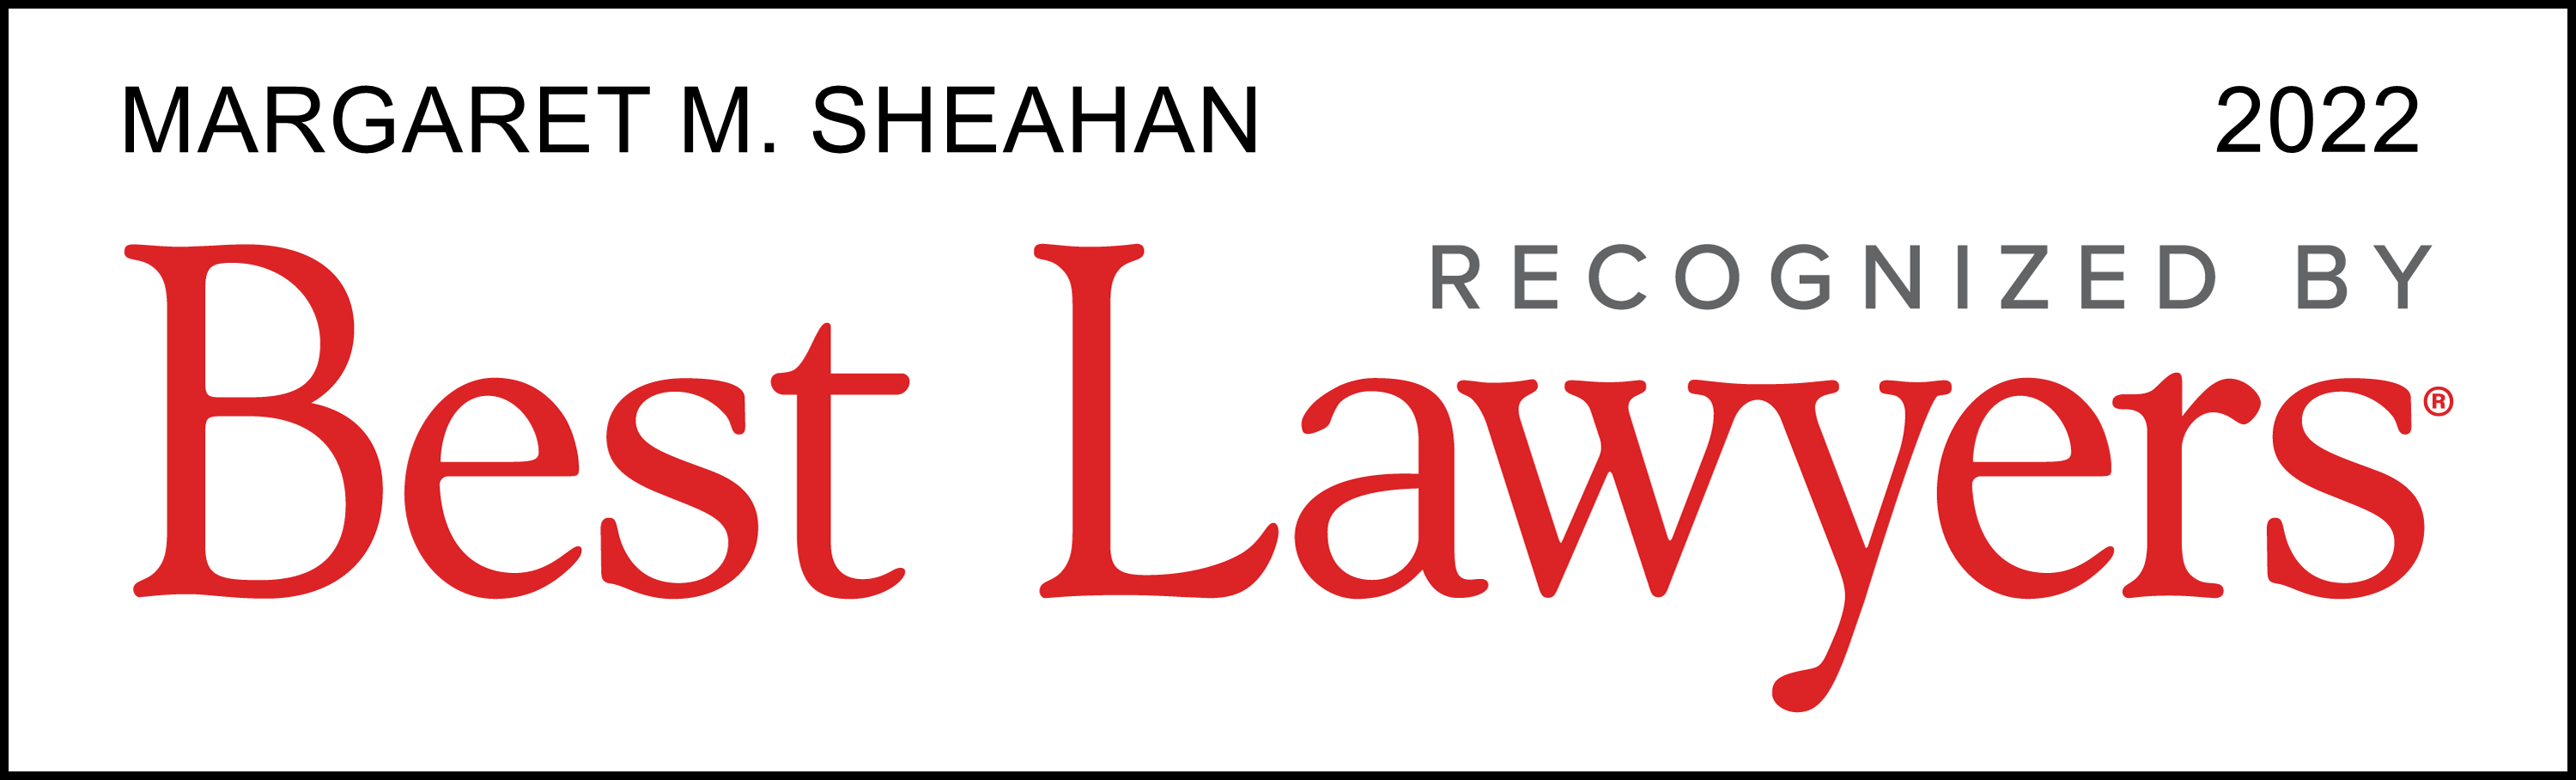 Margaret M. Sheahan | 2022 | Recognized By Best Lawyers